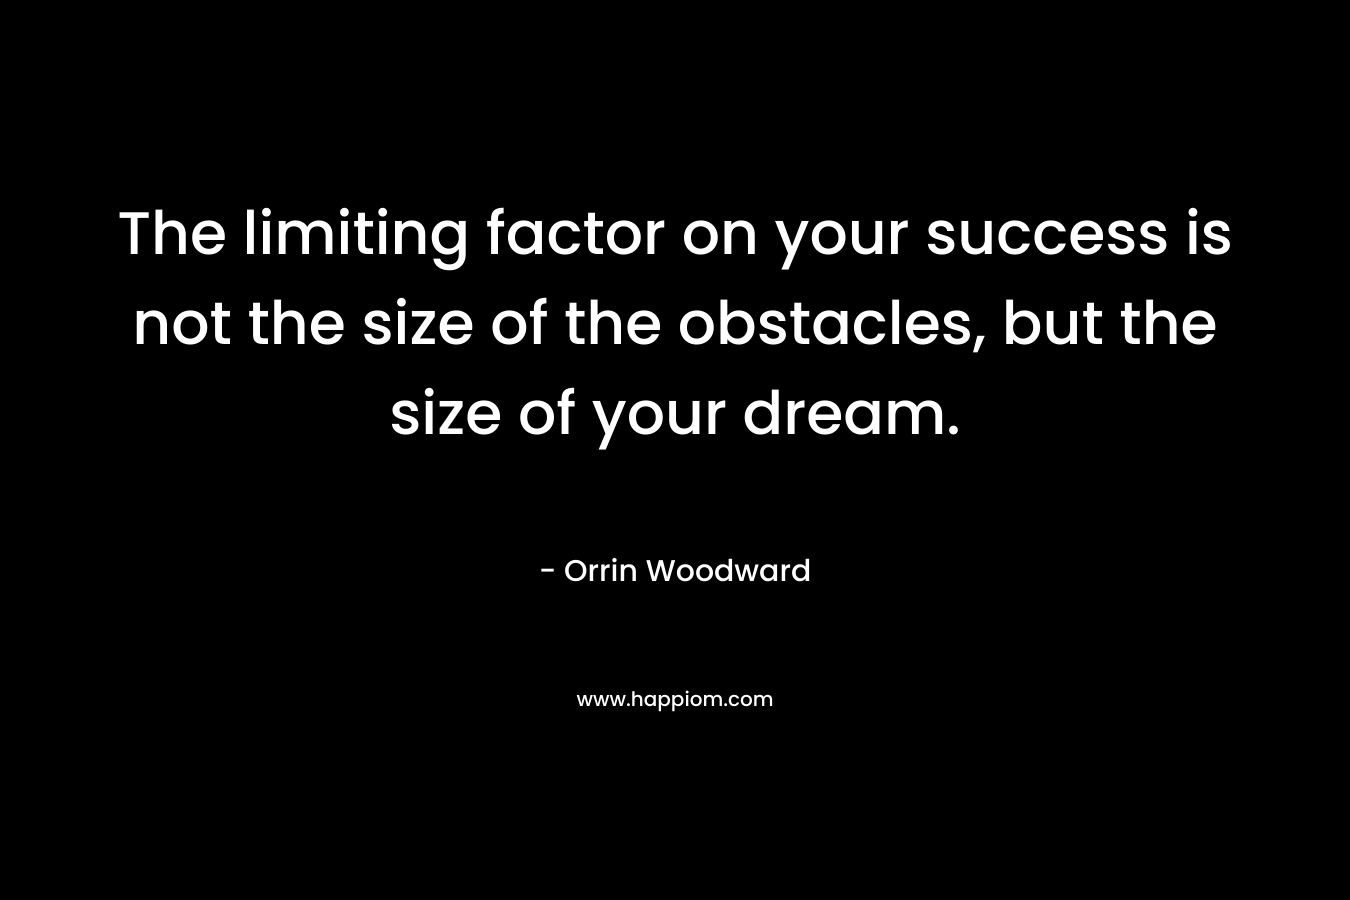 The limiting factor on your success is not the size of the obstacles, but the size of your dream. – Orrin Woodward